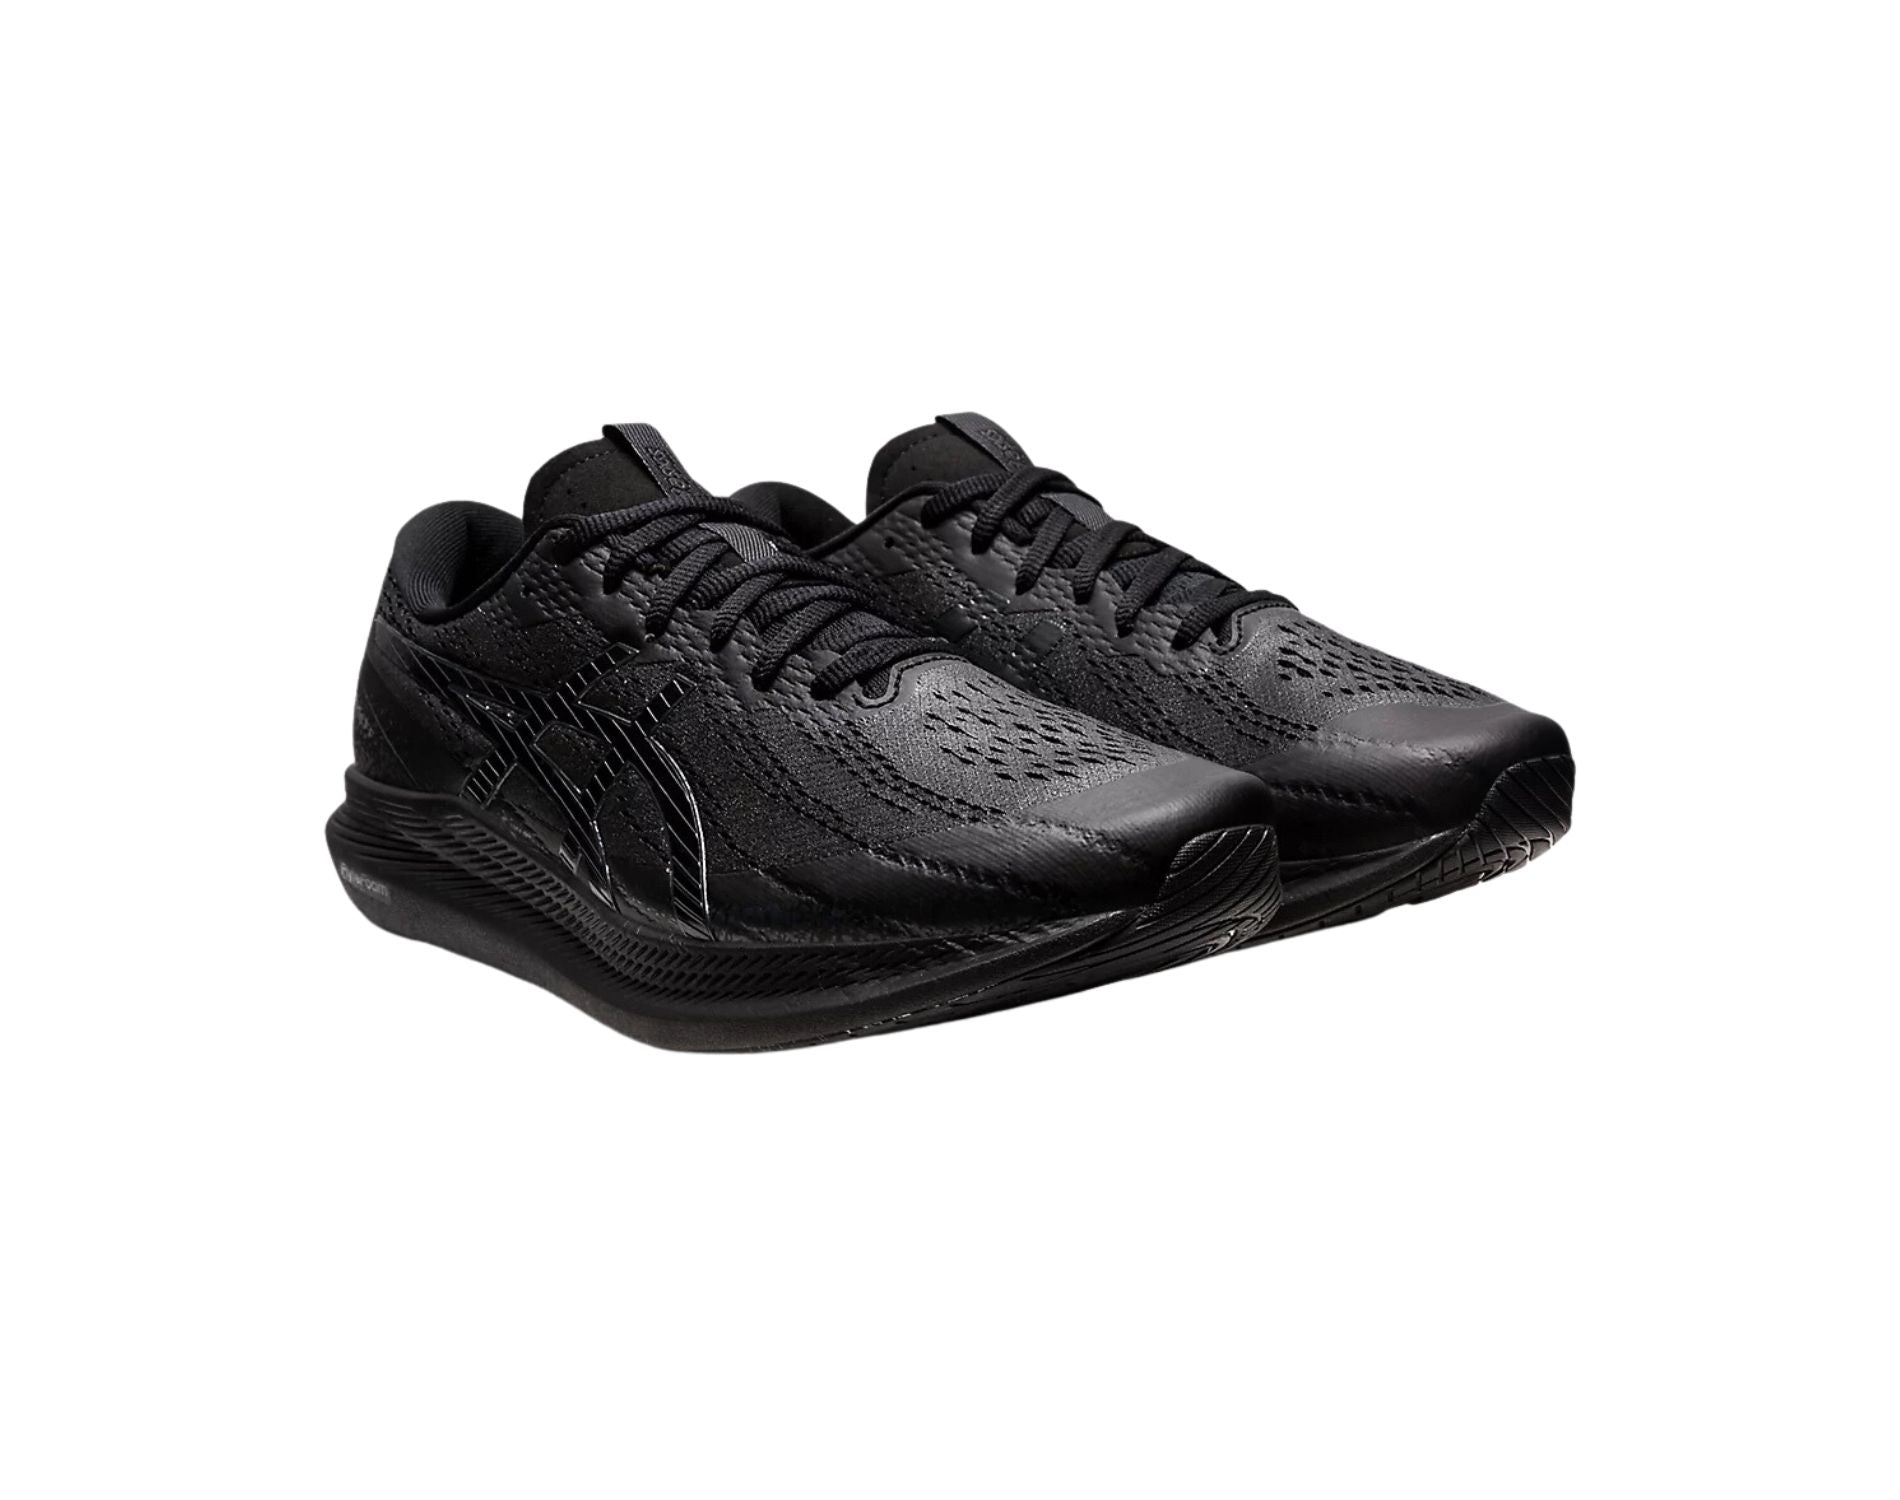 asics walkride ff in black and graphite grey colours lateral